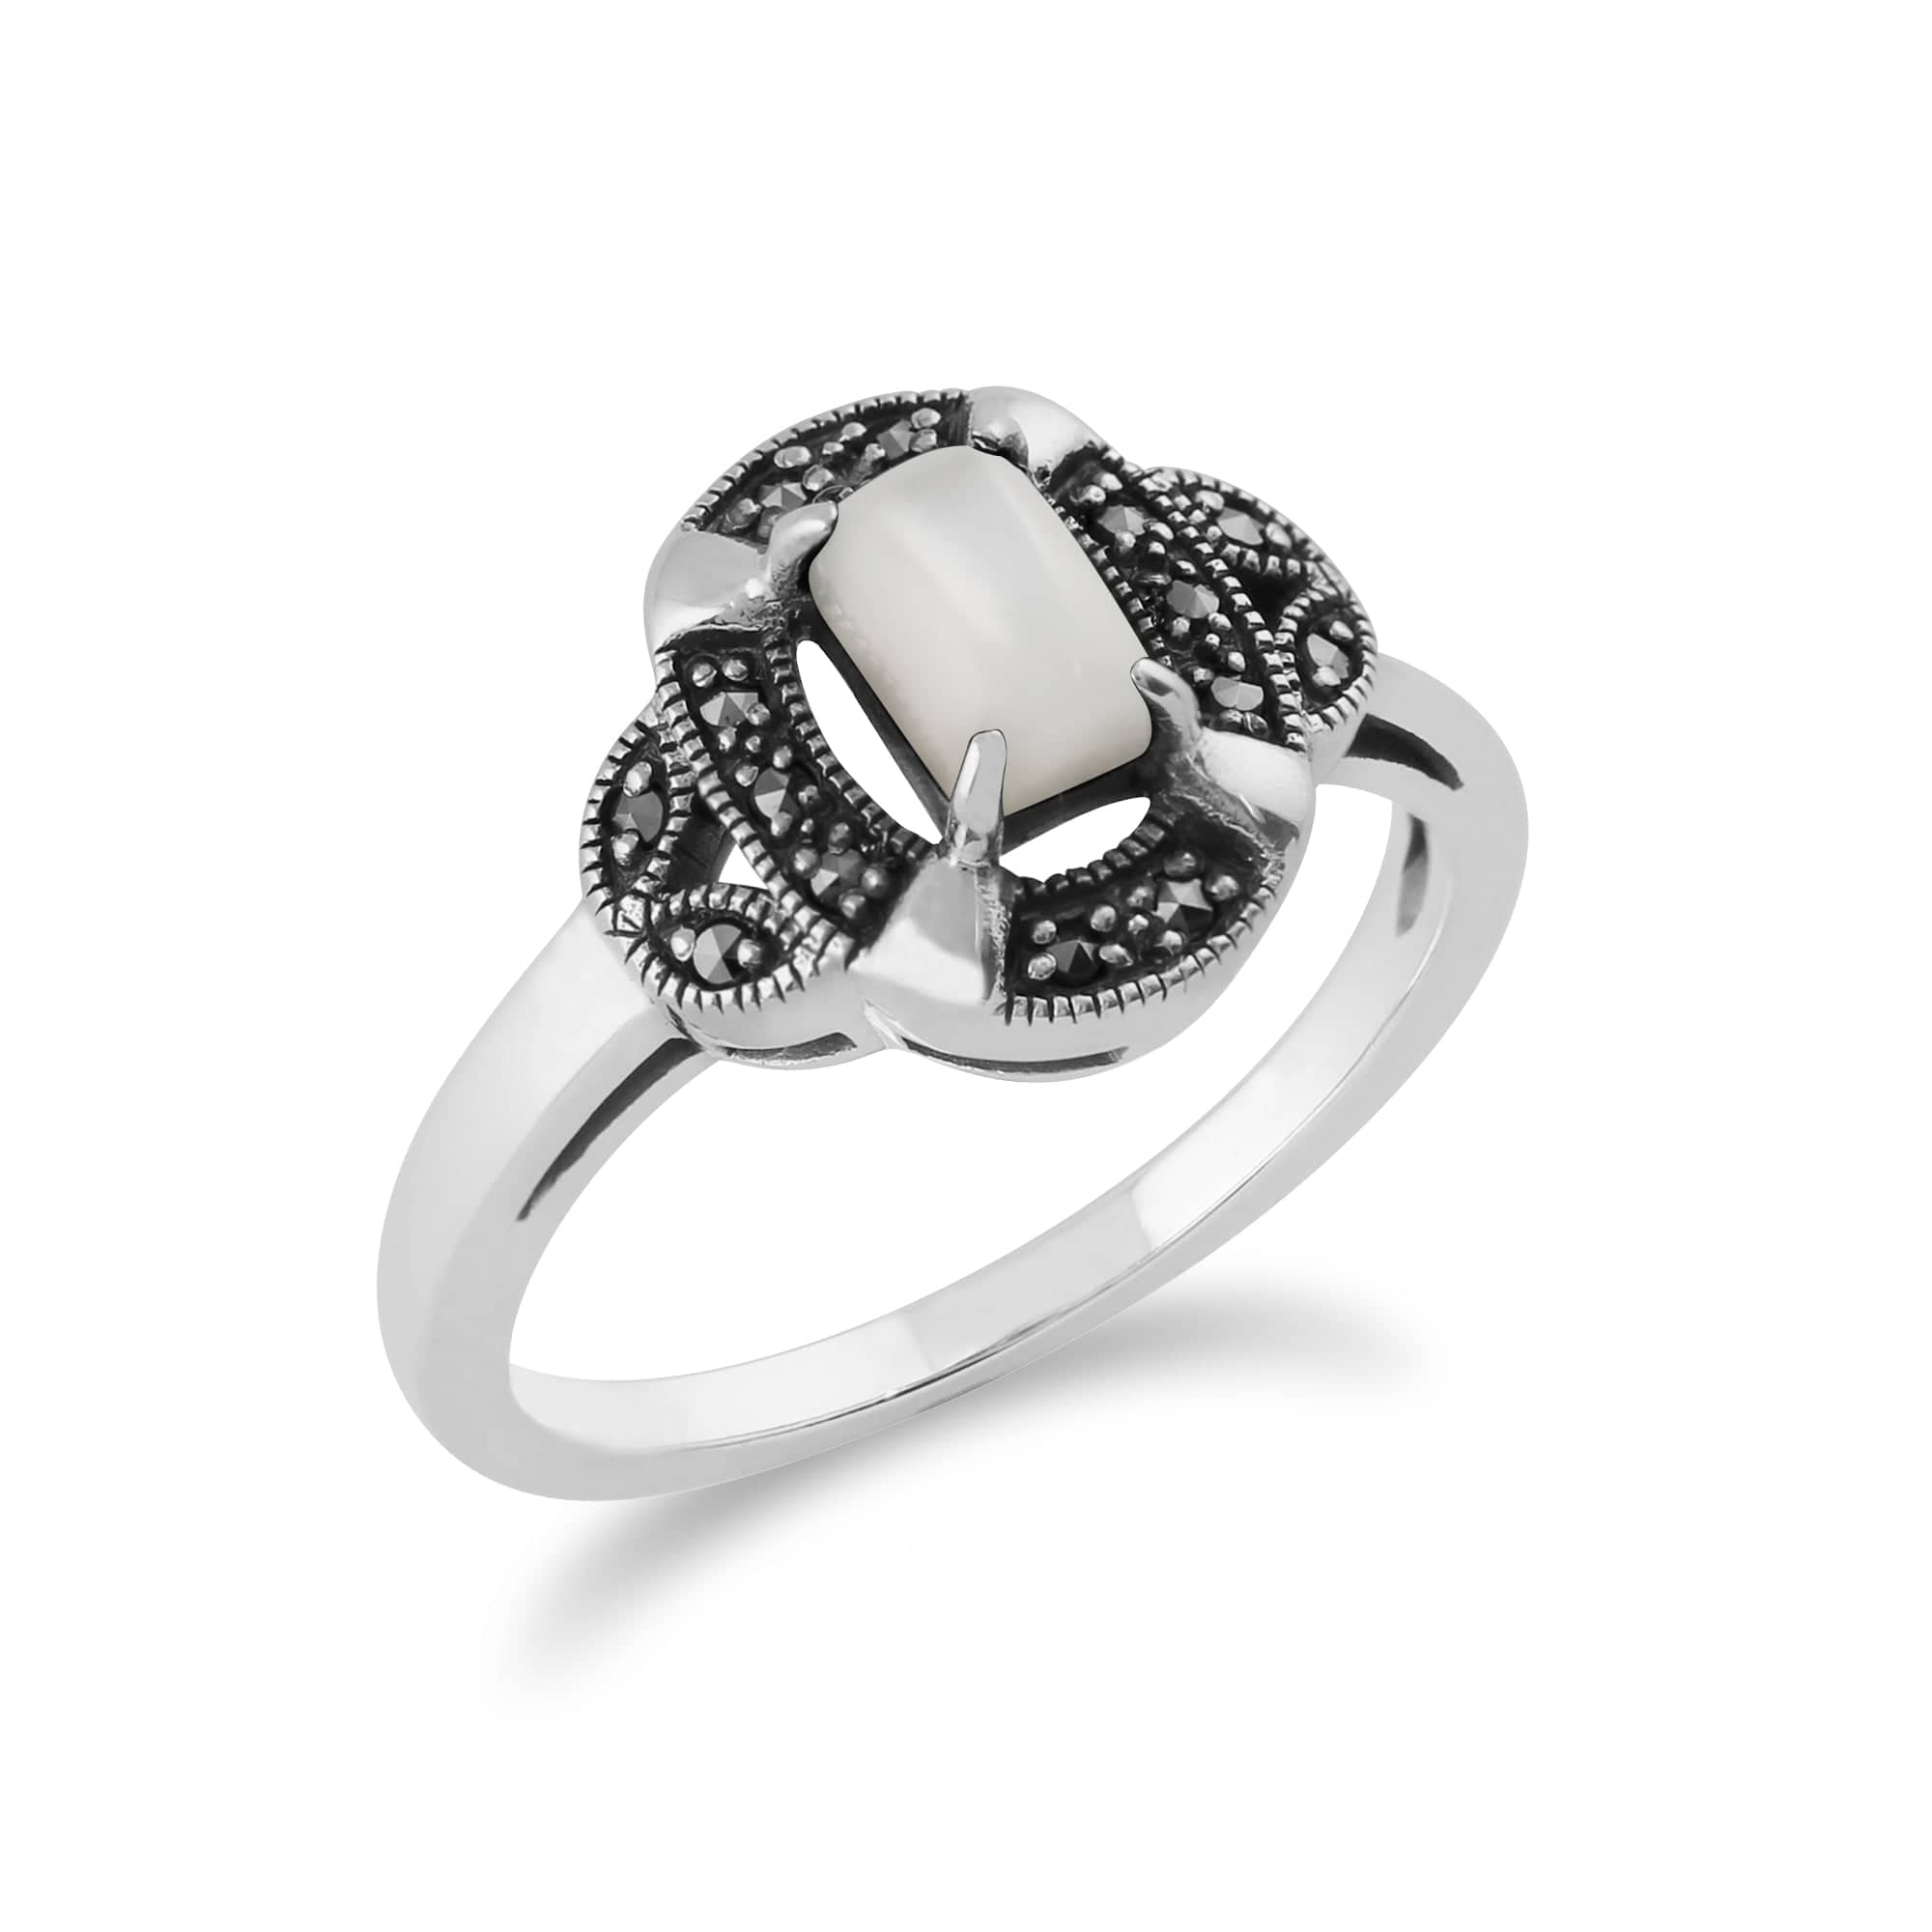 Gemondo 925 Sterling Silver 0.50ct Mother of Pearl & Marcasite Art Deco Ring Image 2